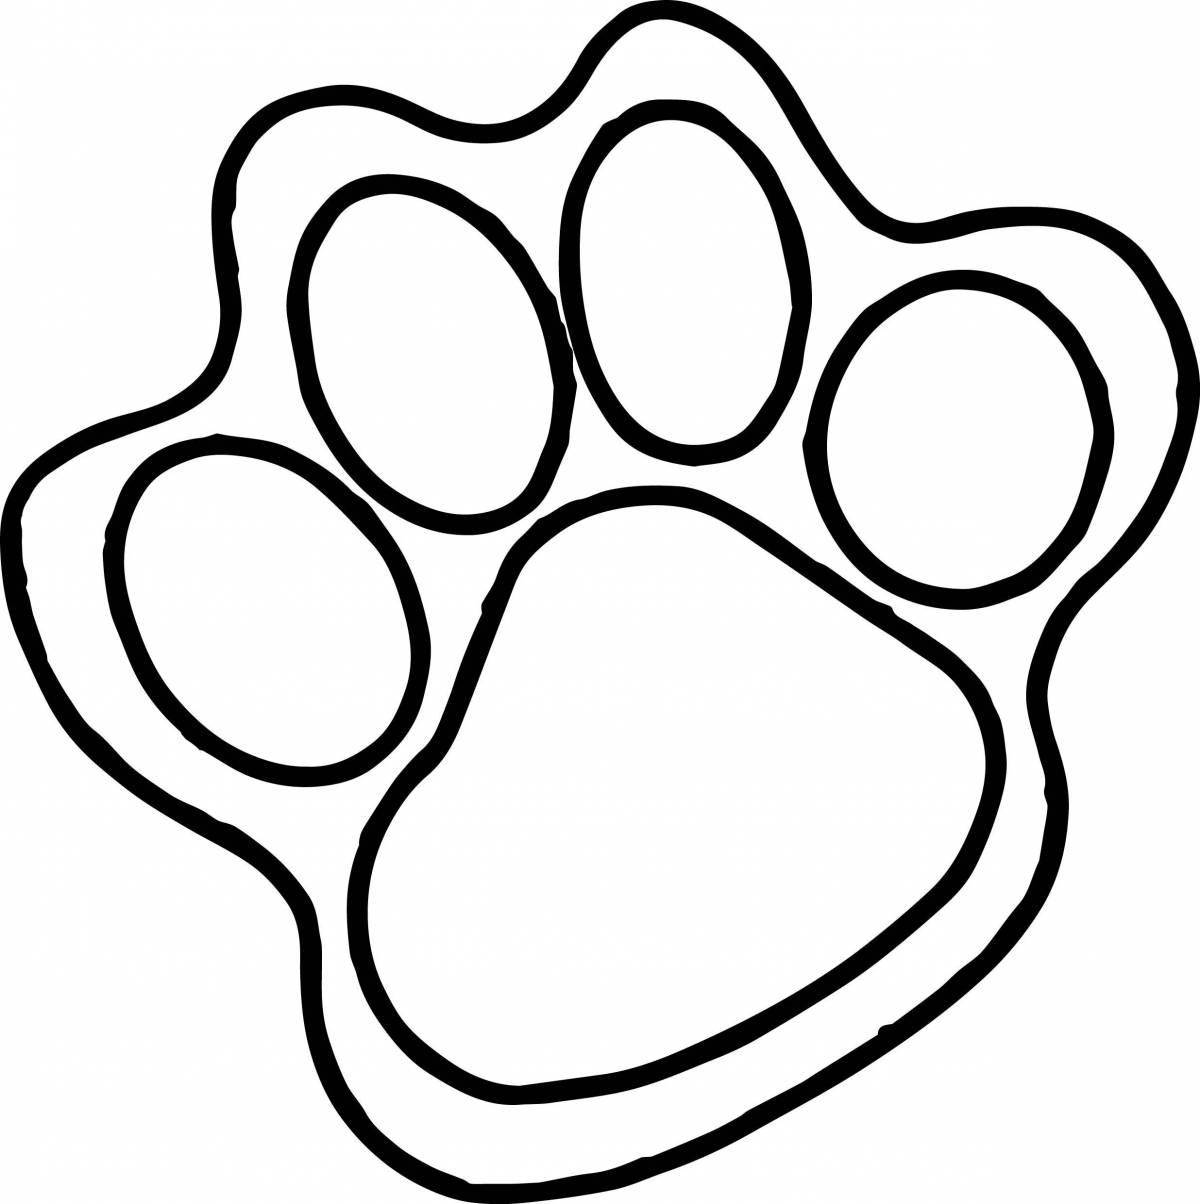 Coloring live cat paw